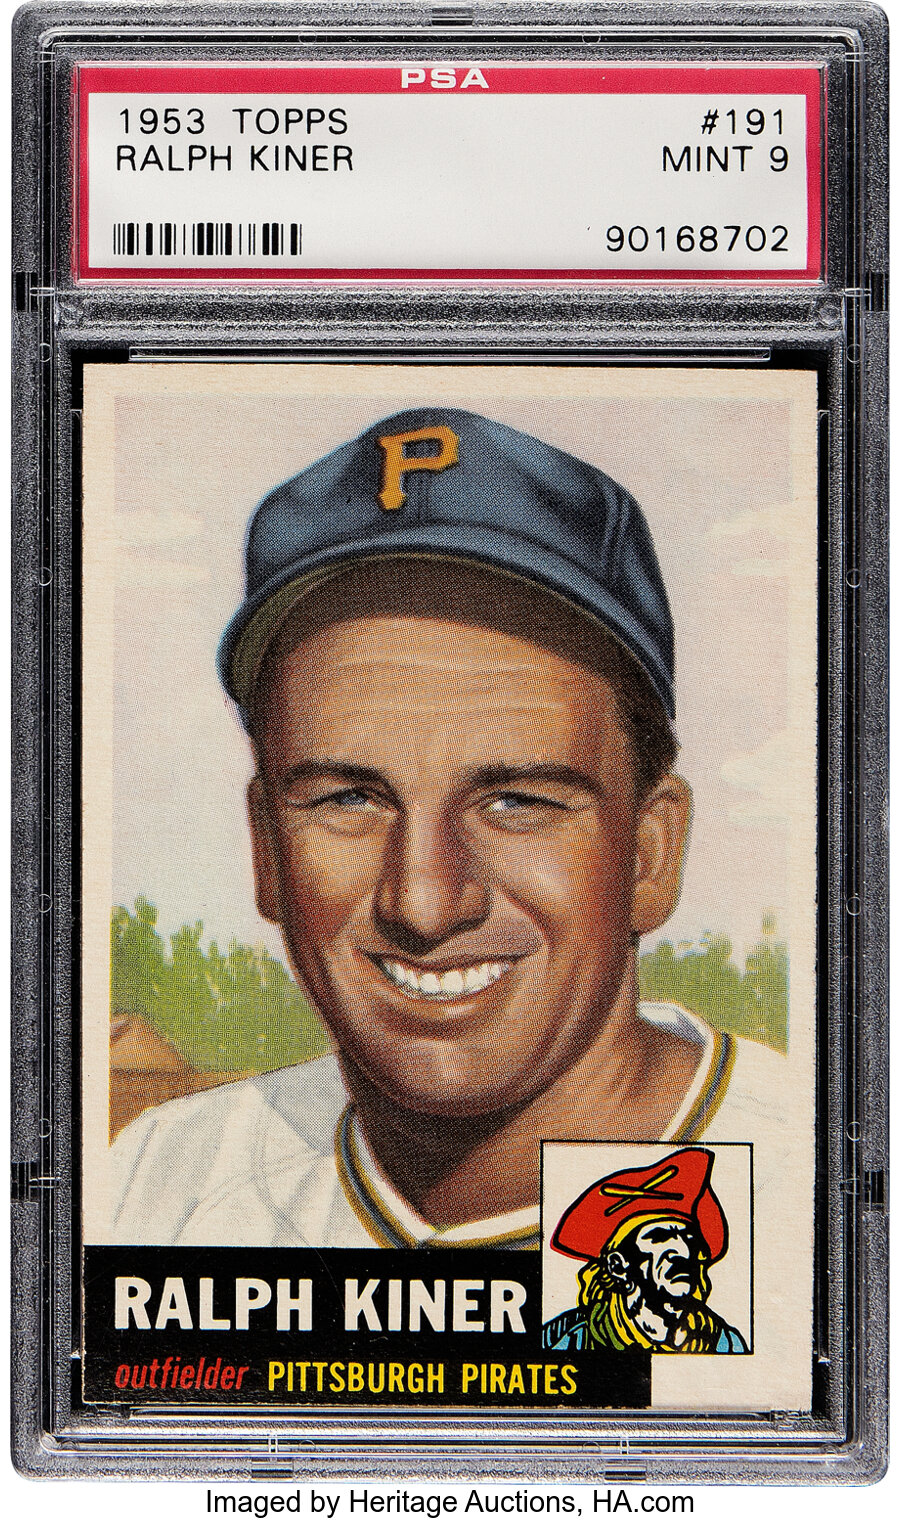 1953 Topps Ralph Kiner #191 PSA Mint 9 - Only One Higher!